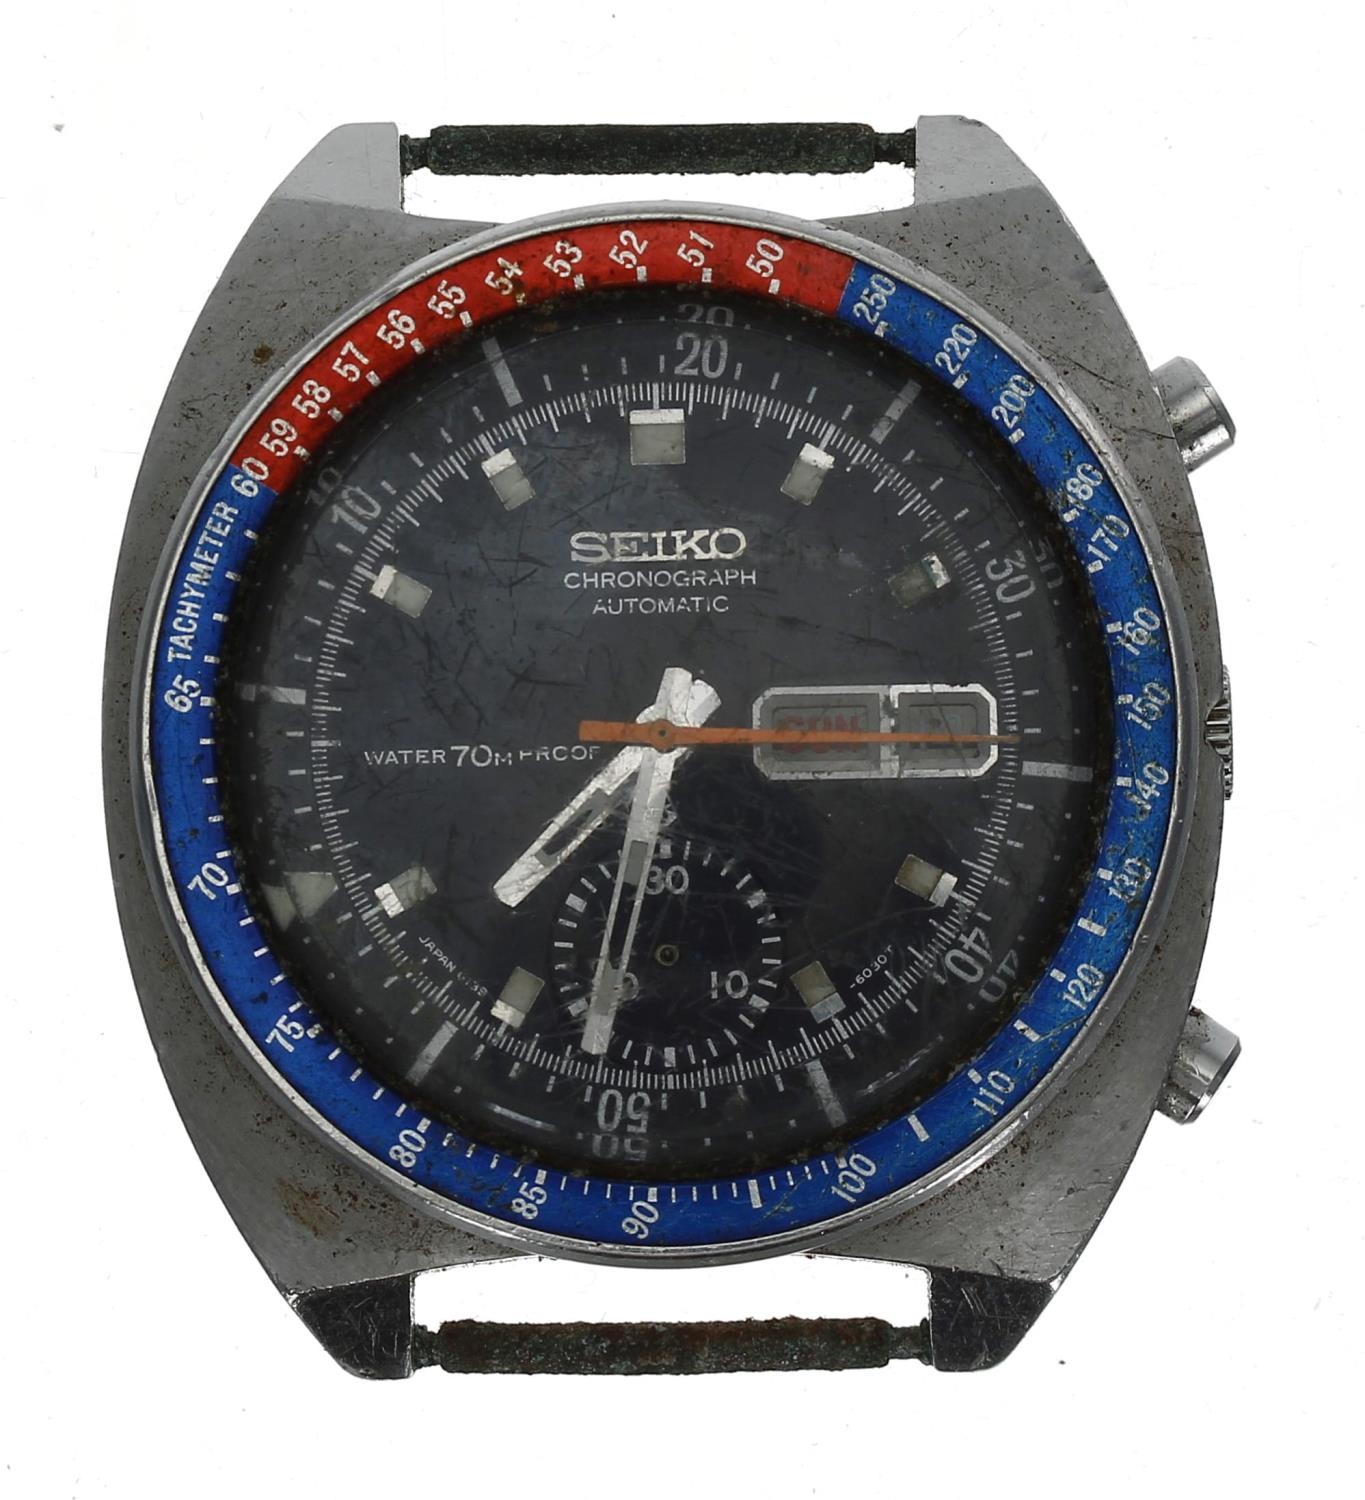 Seiko Chronograph automatic stainless steel gentleman's wristwatch, reference no. 6139-6000,